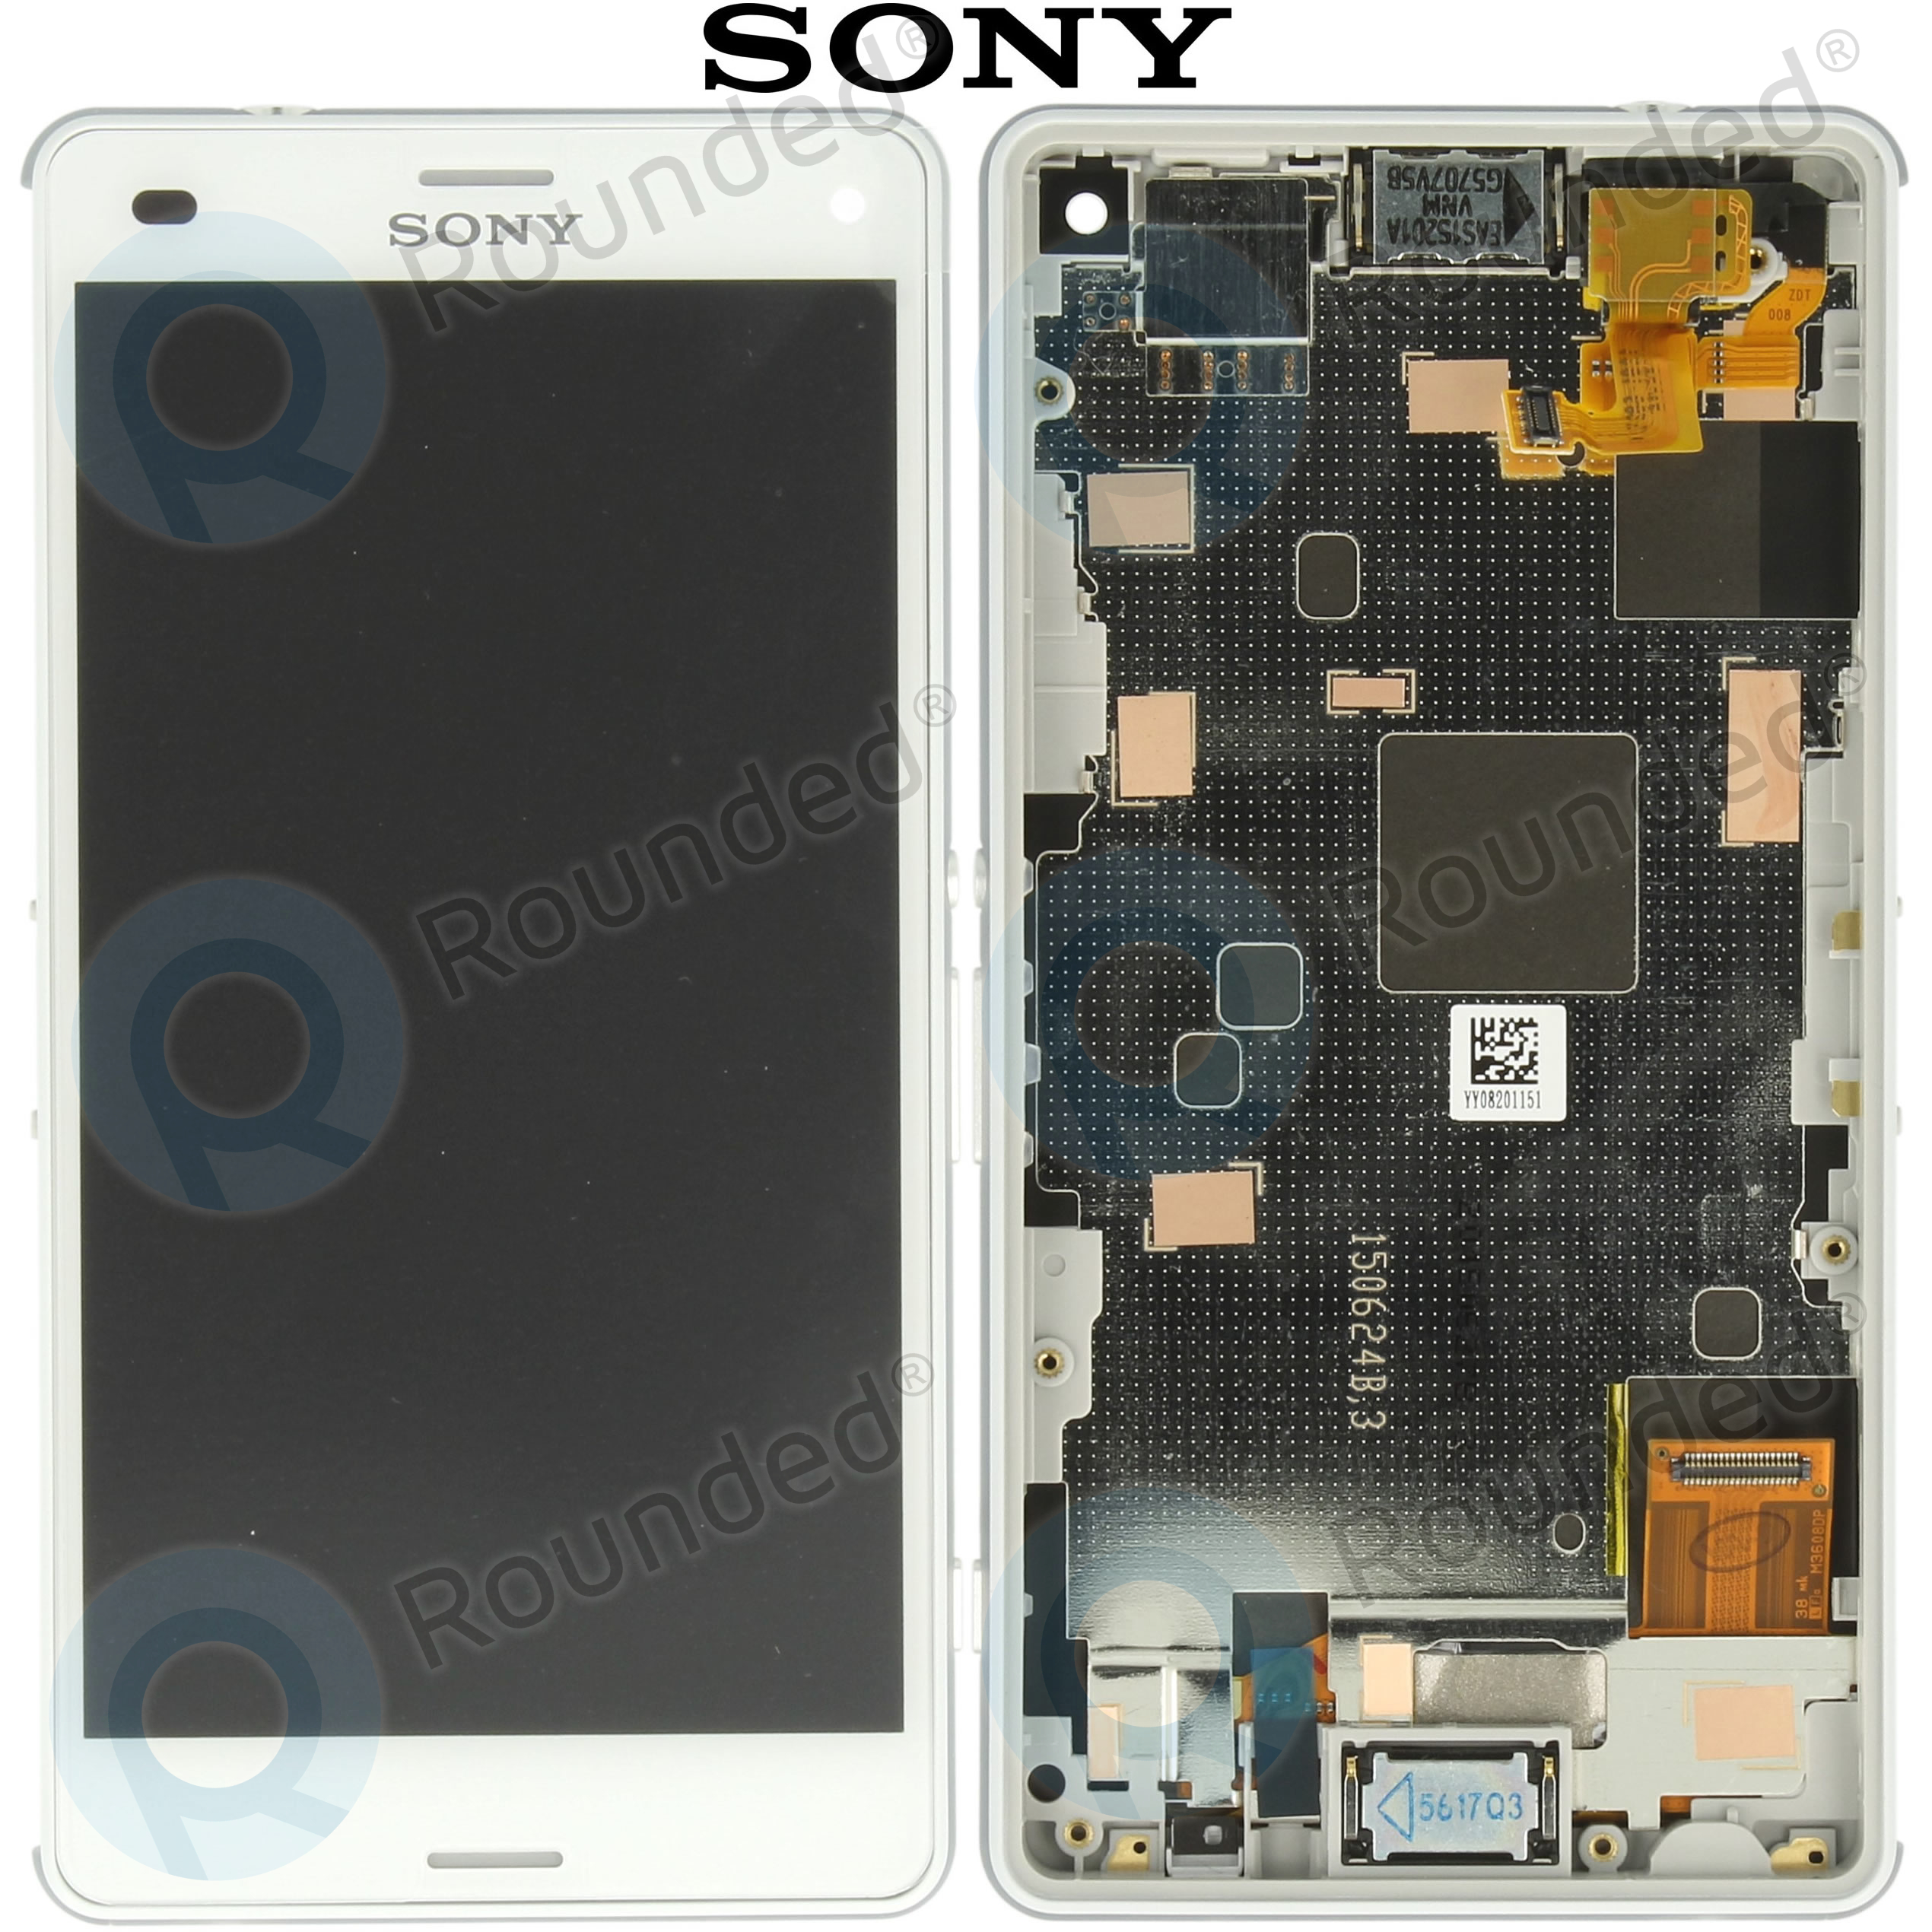 Politiebureau Iedereen Expertise Sony Xperia Z3 Compact (D5803, D5833) Display unit complete white  U500139631289-2680